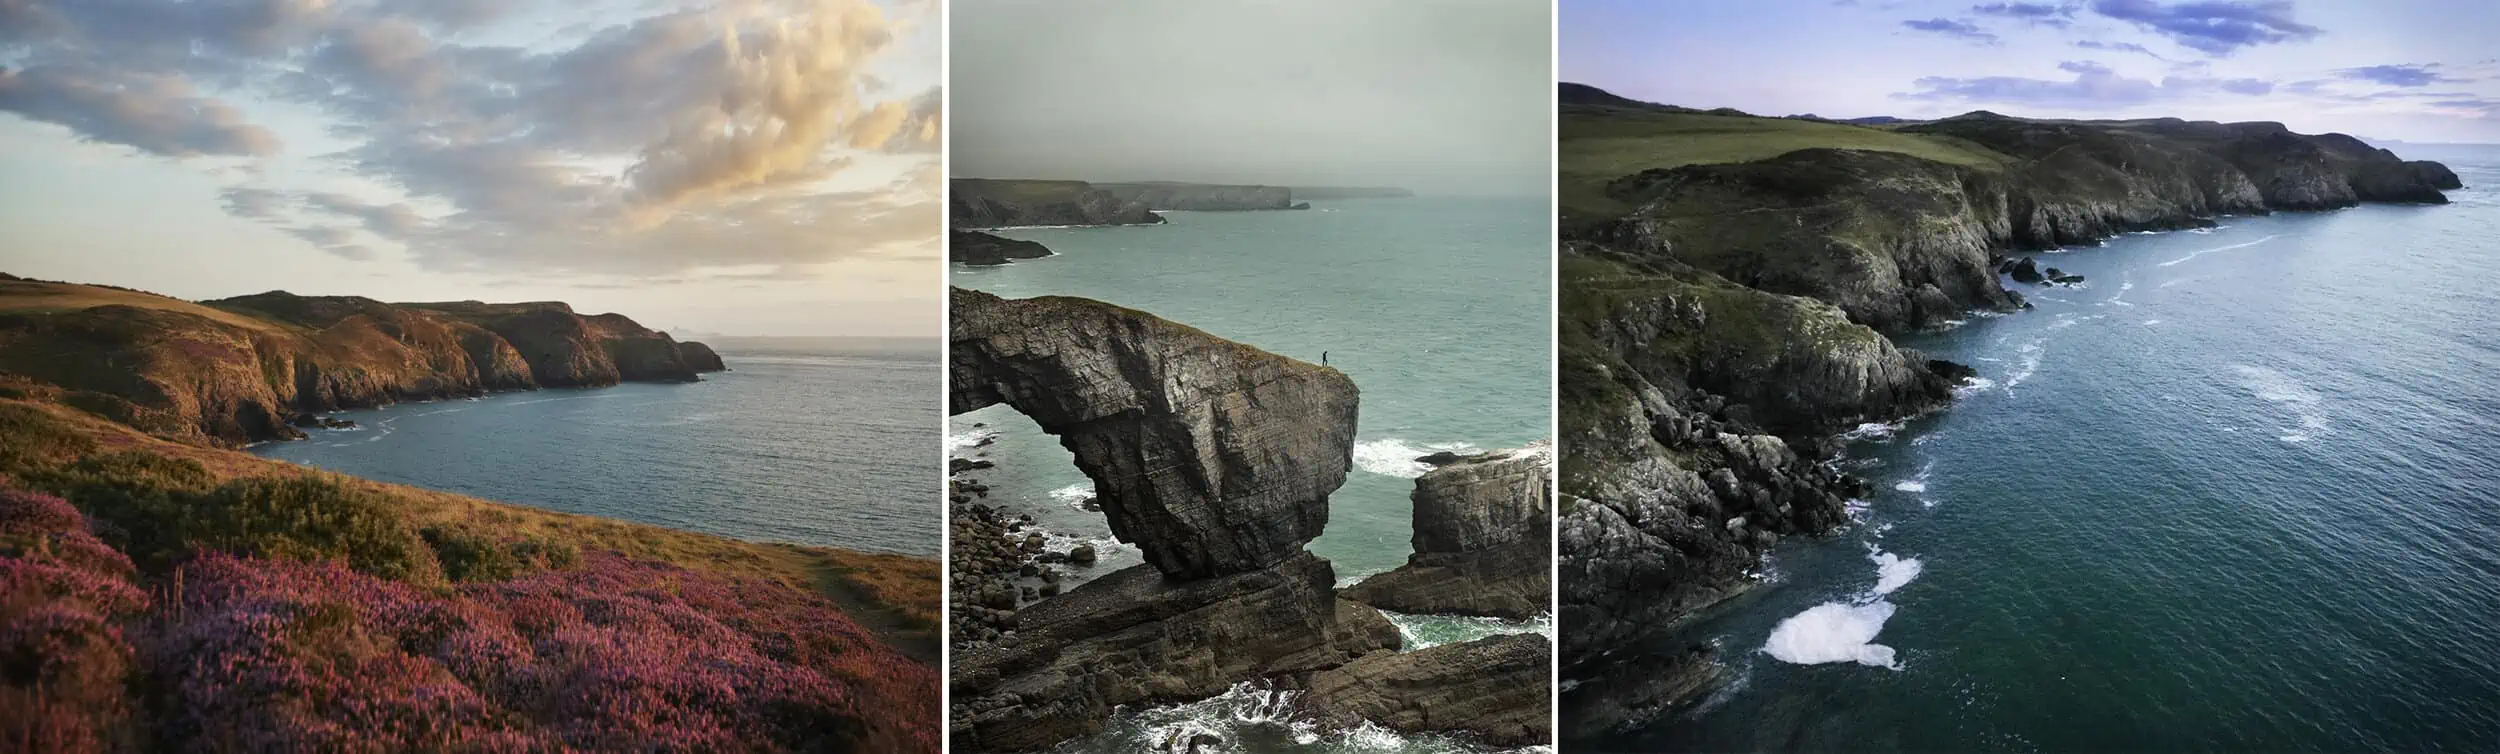 ID: From left to right 1: A landscape image. In the foreground of this coastal scene, the land is dressed with a golden light. There is purple heather in the foreground and the sea is a dark blue. 2: A portrait image. This dark overcast day shows a dramatic rock structure going into the sea with a small figure on the end of the cliff. There are lots of browns, greys and light turquoise in the image. 3: A landscape image. To the left of the image is pictured a rocky steep cliff, with white rocks and grassy green tops. The waves are crashing against the rocks and cliffs. The sky is dark blue and purple - the sun is setting with a wine dark sea.